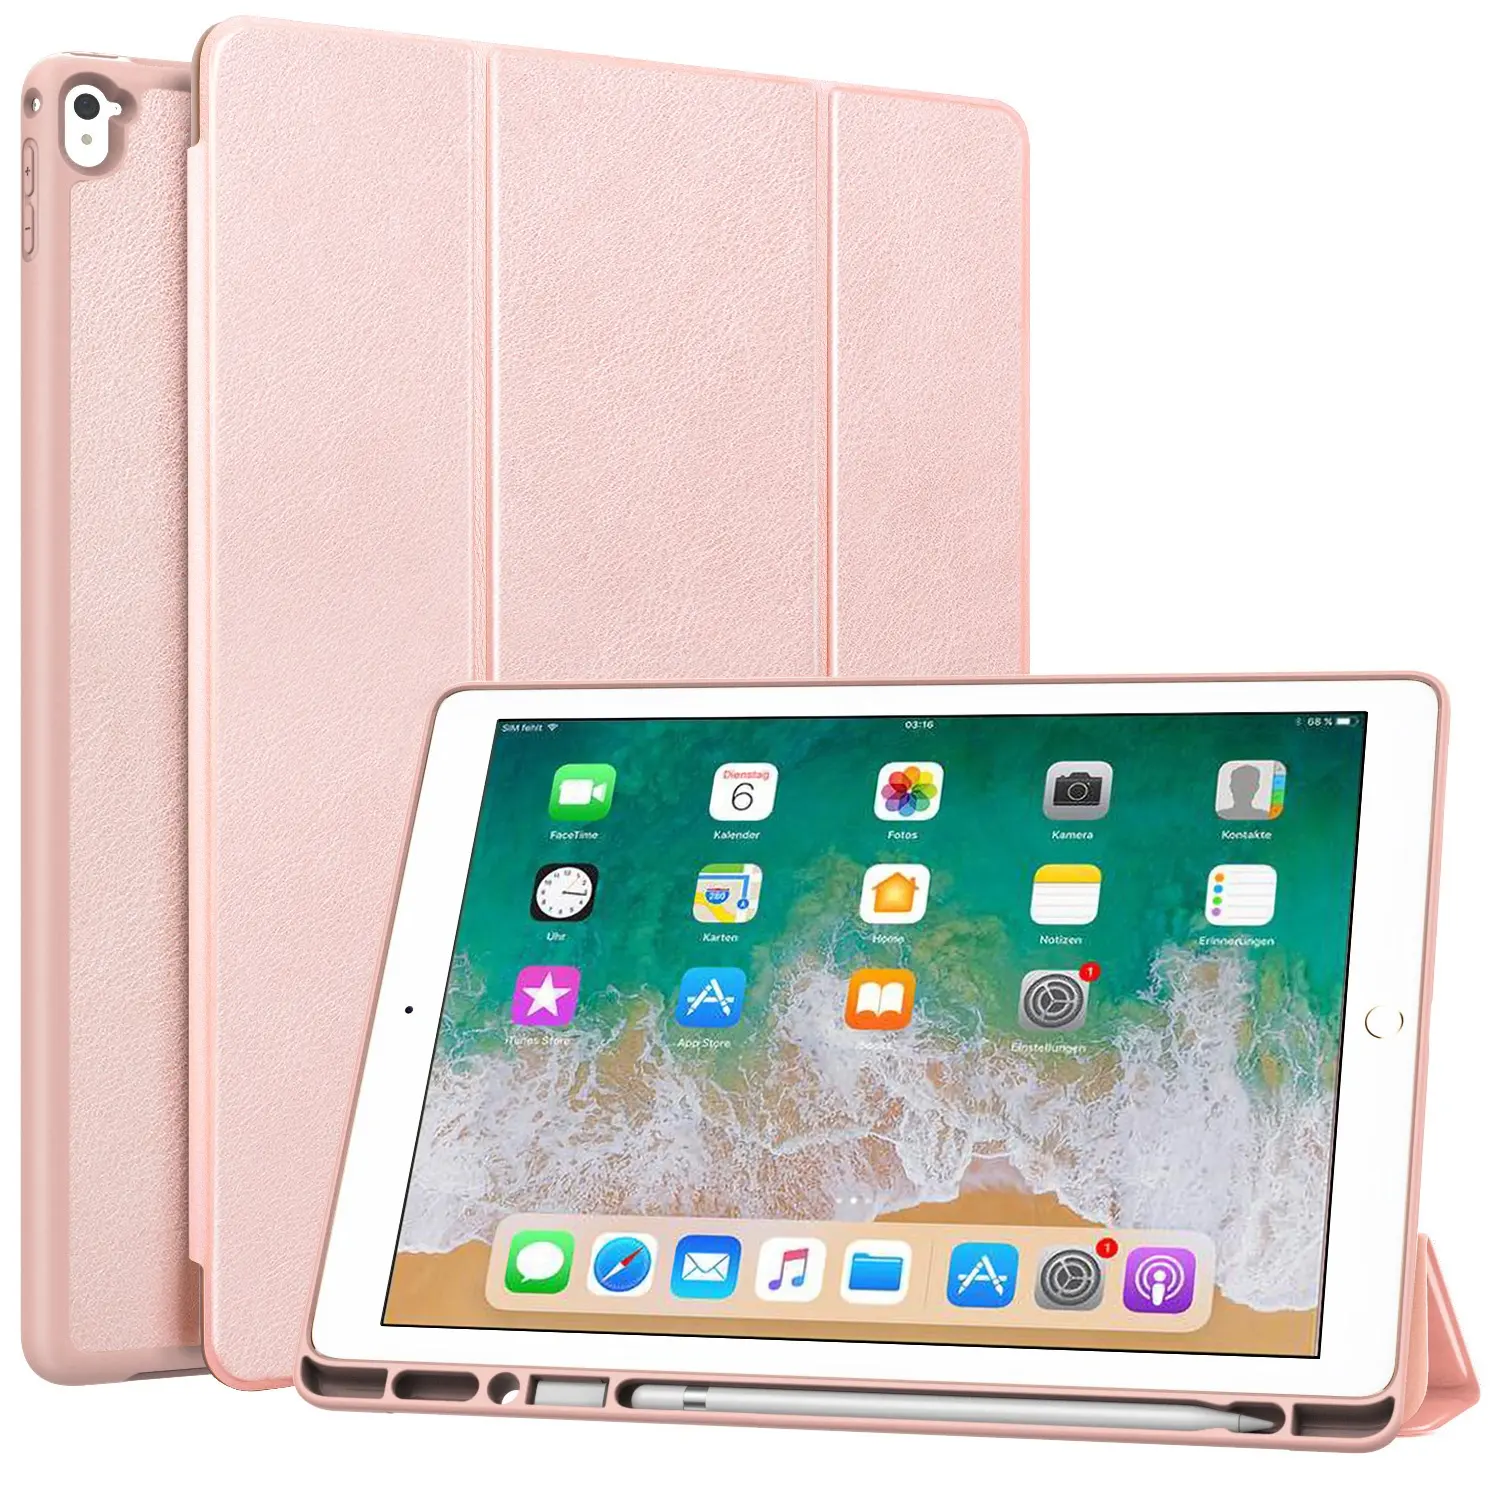 MoKo Ultra Slim Soft TPU Protective Cover Premium PU Leather Durable Folding Tablet Stand Case for iPad Pro 12.9 2017 2015